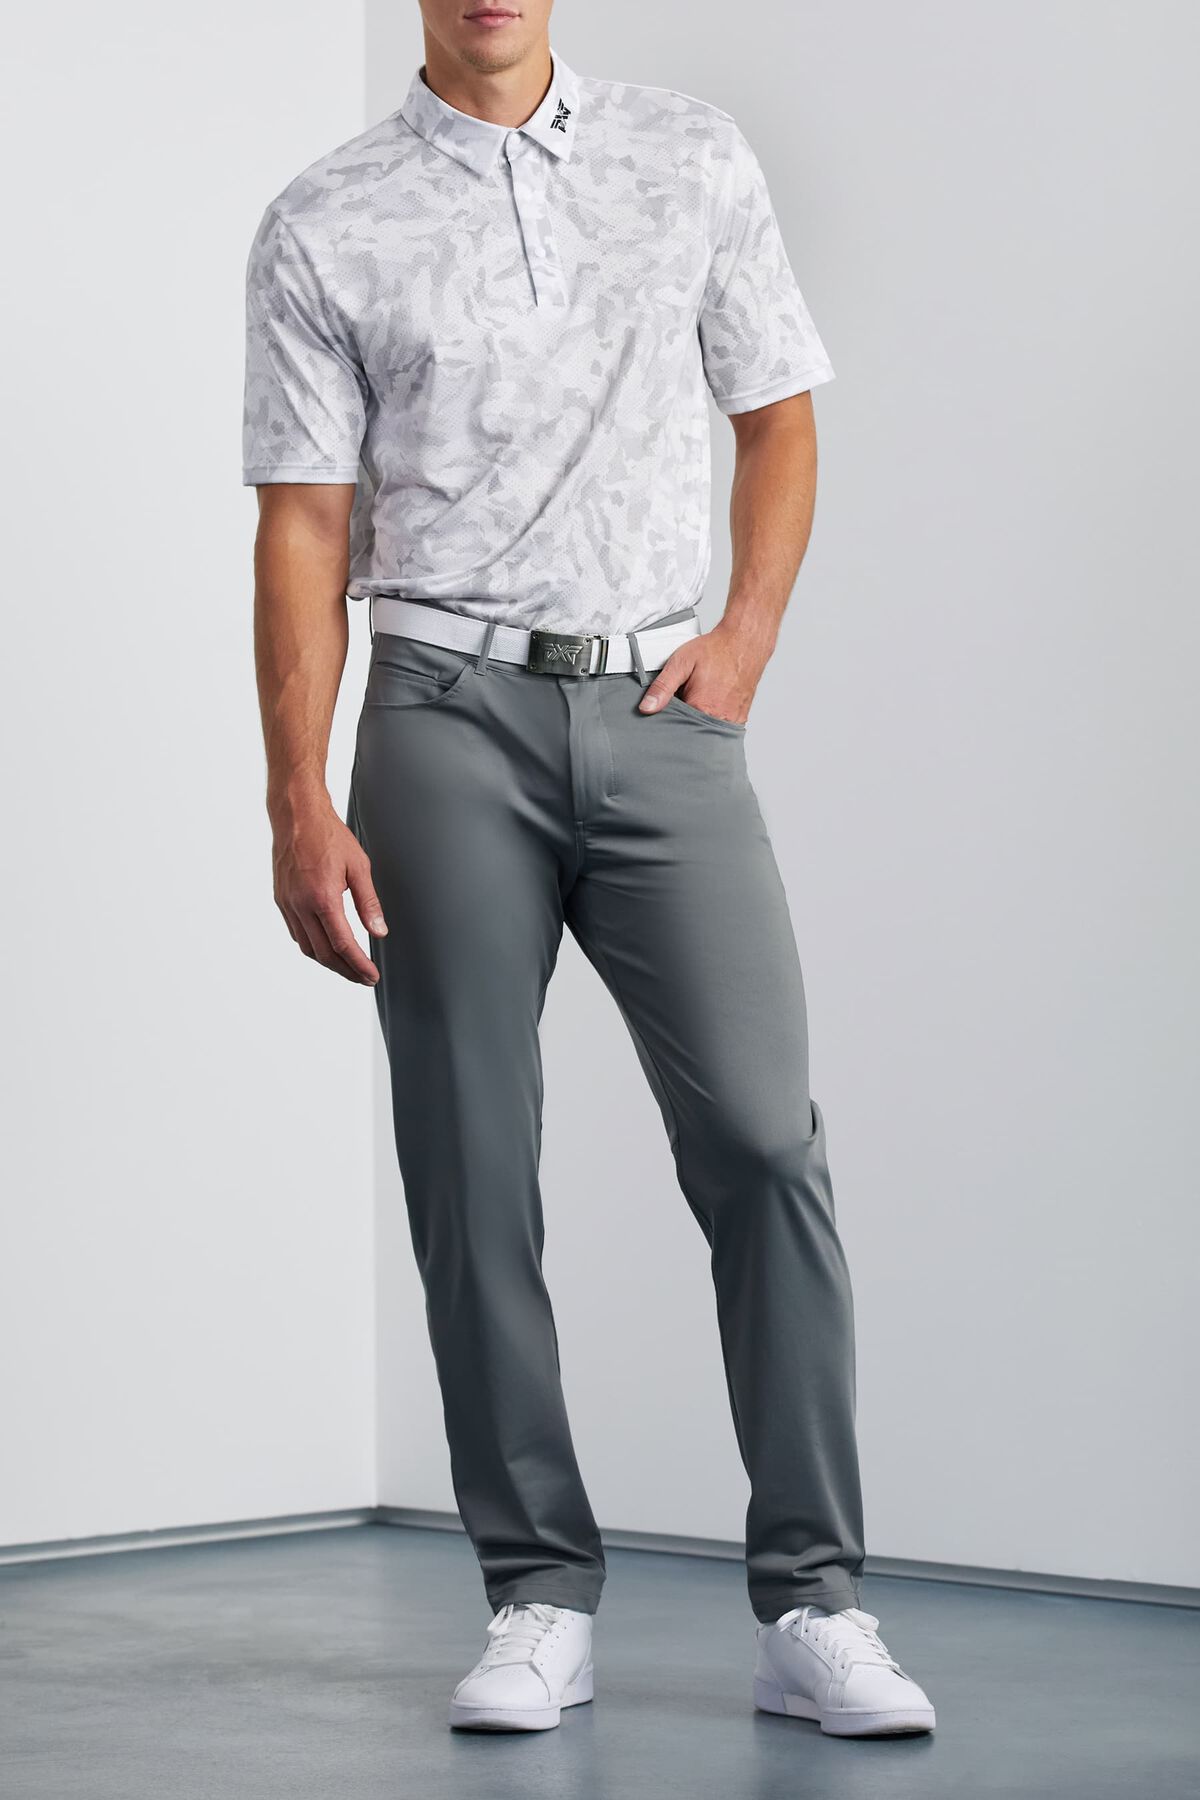 Essential Golf Pants  Shop the Highest Quality Golf Apparel, Gear,  Accessories and Golf Clubs at PXG